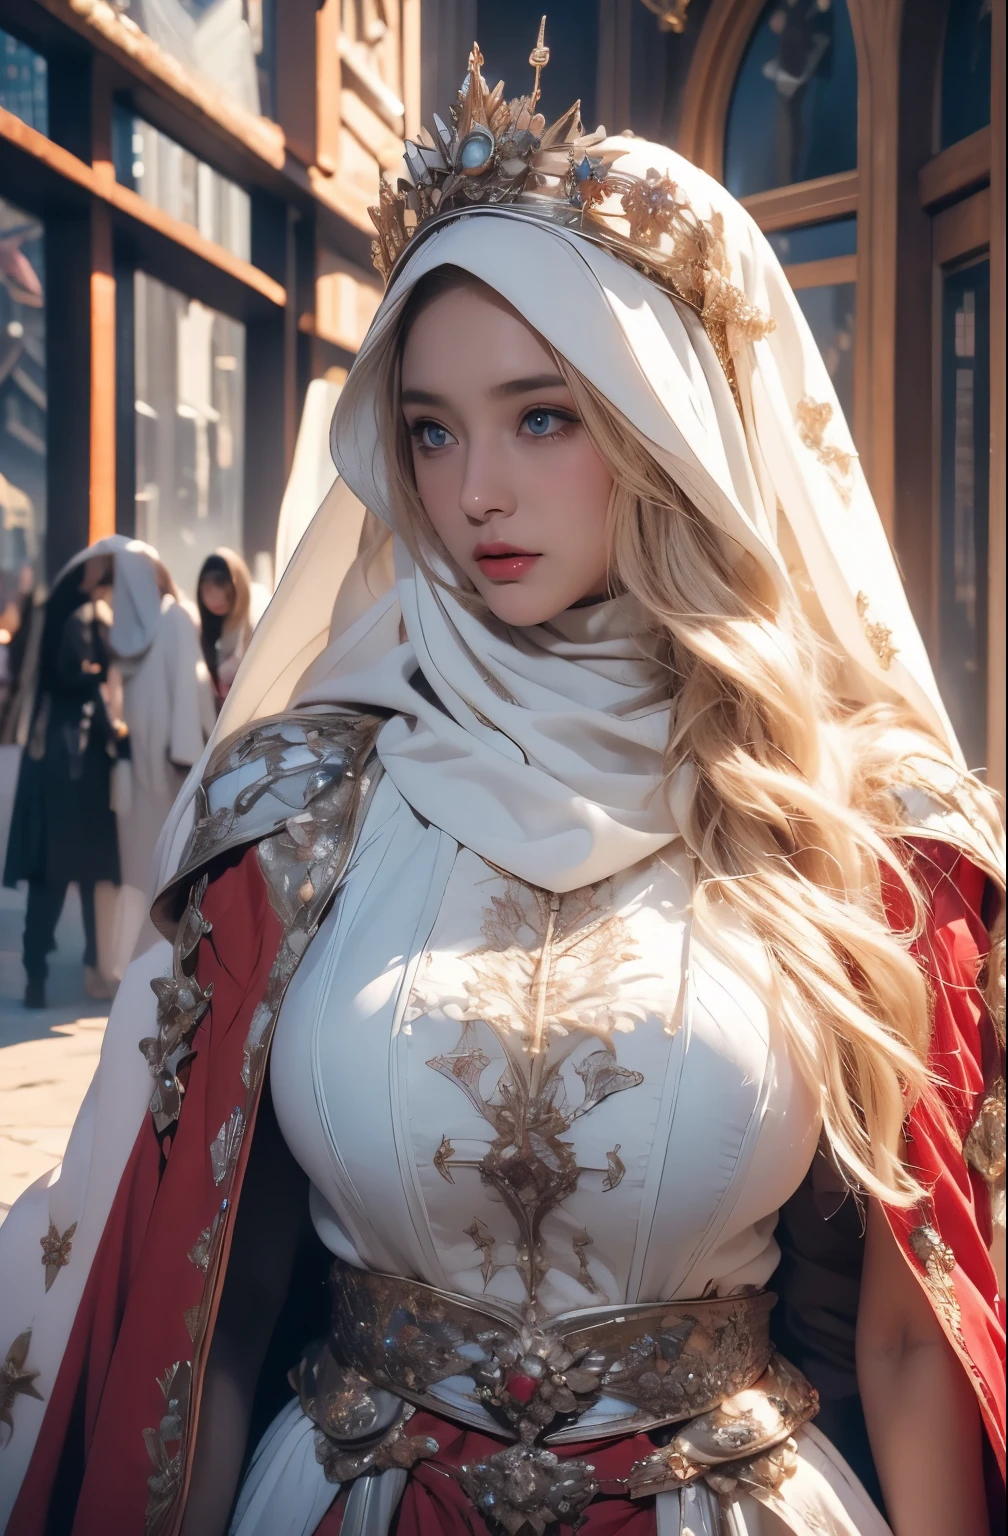 Elegant armor,princess, Full body, wearing a hijab , crown luxury , blue eye, blond hair, around 17 years old, (red silver hijab), tmasterpiece，Best quality at best，A high resolution，8K，((Portrait))，(upper body)，Original photo，real photograph，digital photography, (Medieval angel princess in fantasy style), sexy princess ，blue eye， super colossal brest, pointy colossal breast extravagant ornament，cparted lips，Keep your mouth shuegant and charming，((Blushing))，virgin content，Calm and handsome，(Medieval fantasy armor, The Beautiful super huge pointy breast, small waist, perfect colossal breast of princess body, a blue delicate pattern，red Cloak)，(anhelic princess character medieval fantasy style，oc render reflection texture, sexy style,  sexy colossal breast , medieval castle background, slim body, very small waist, (luxury armor pattern) , super slim , sexy style, angel 4 wings